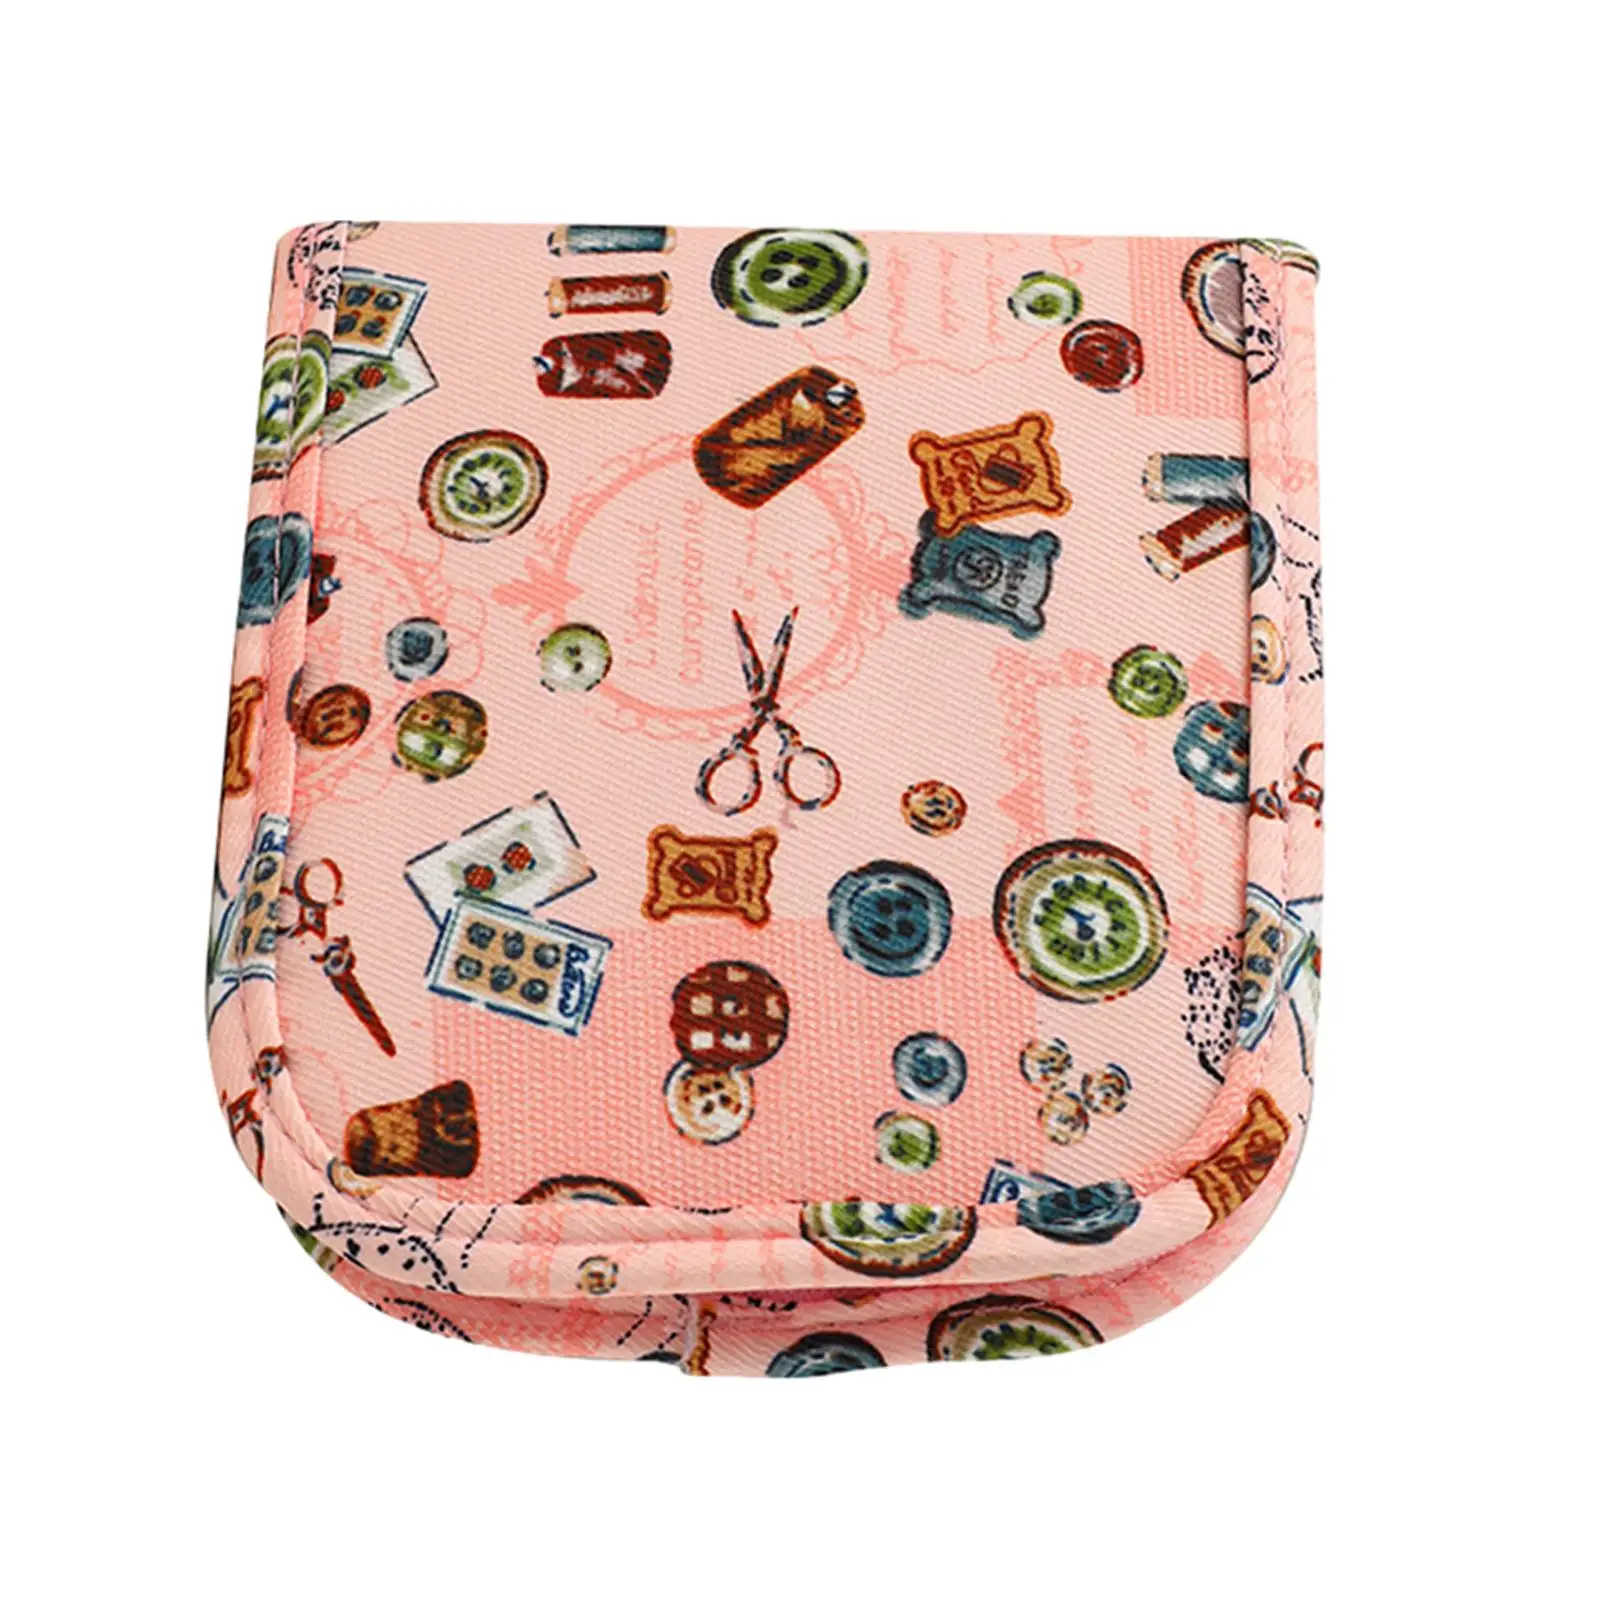 Sewing Travel Bag Travel Case Empty Oxford Cloth Sewing Storage Bag for Tape Measure Threader Travel Sew Repair Carrying Case